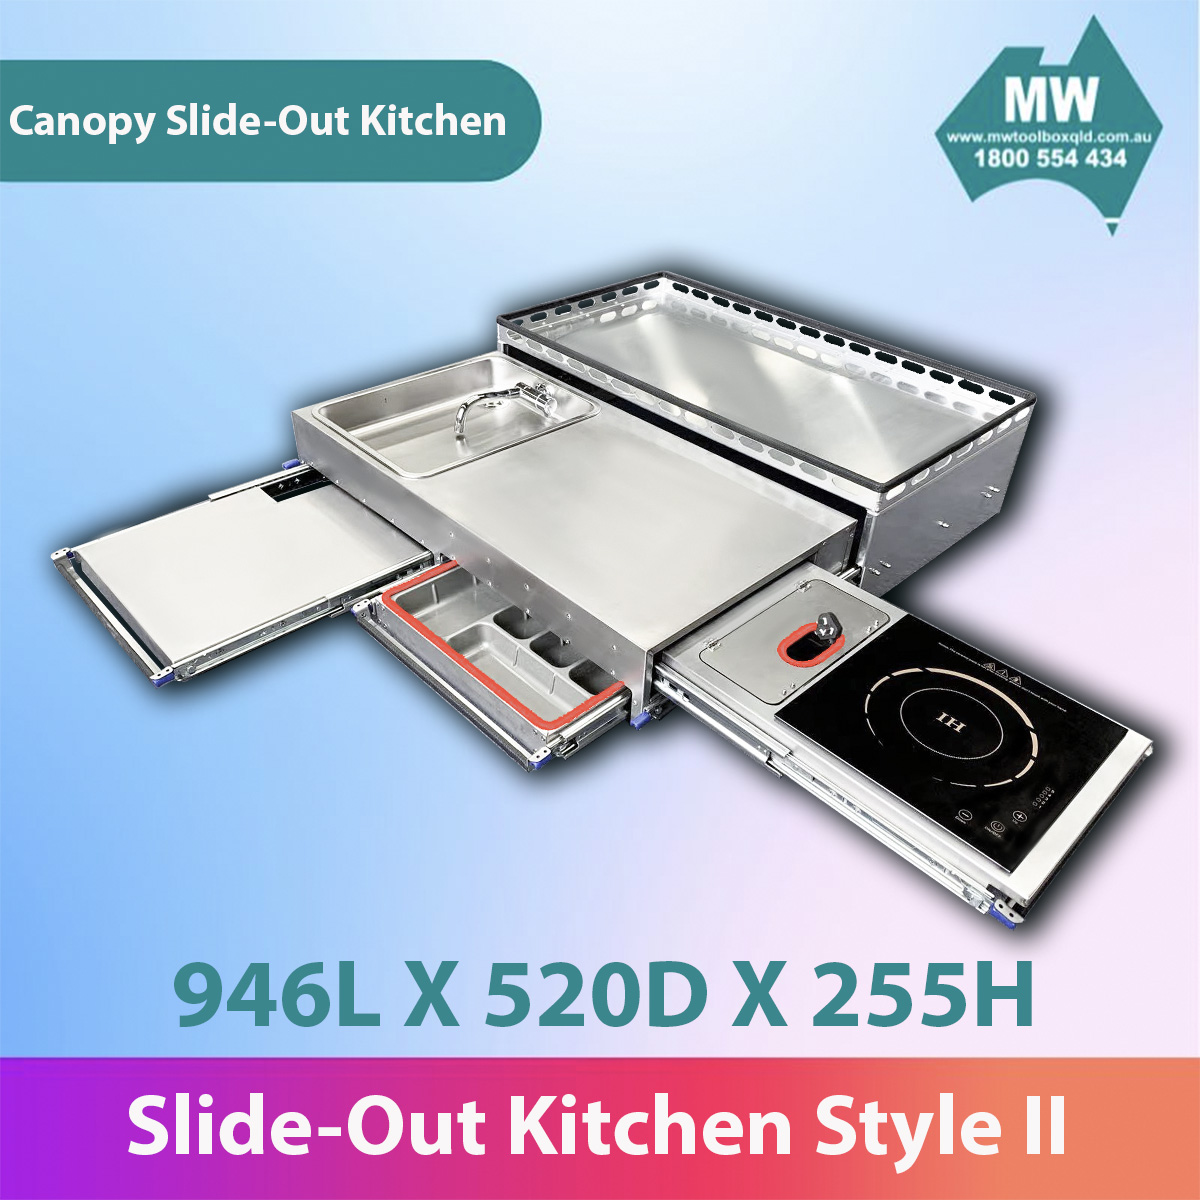 MW SLIDE OUT KITCHEN CANOPY KITCHEN STYLE II-3